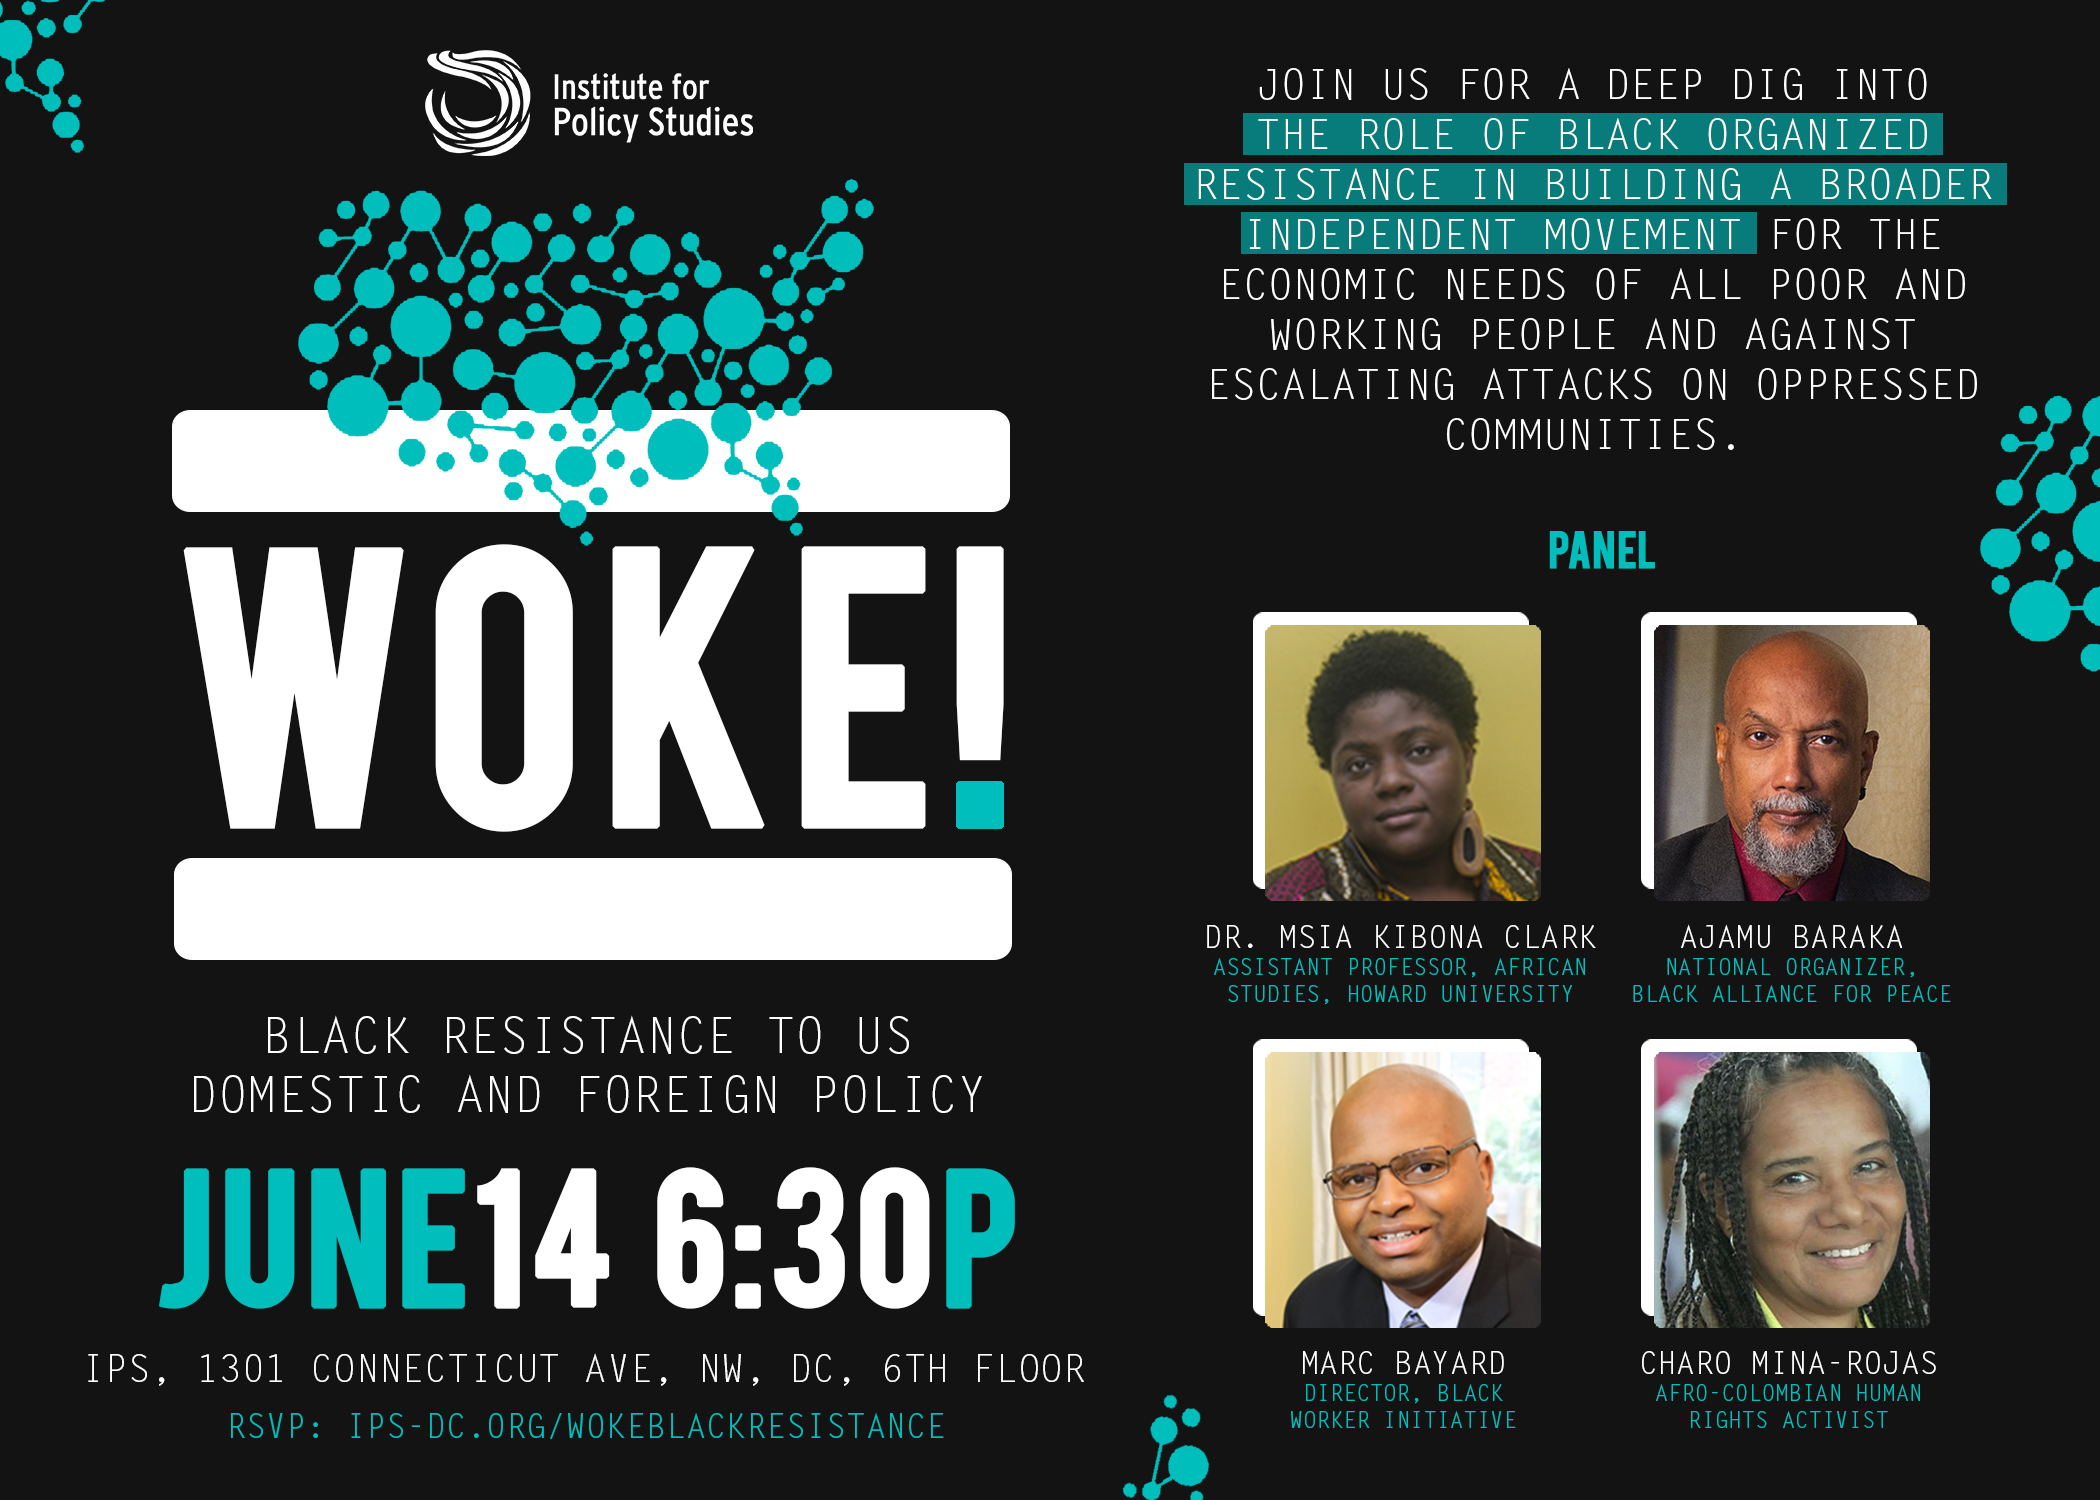 Woke!: Black Resistance to US Domestic and Foreign Policy